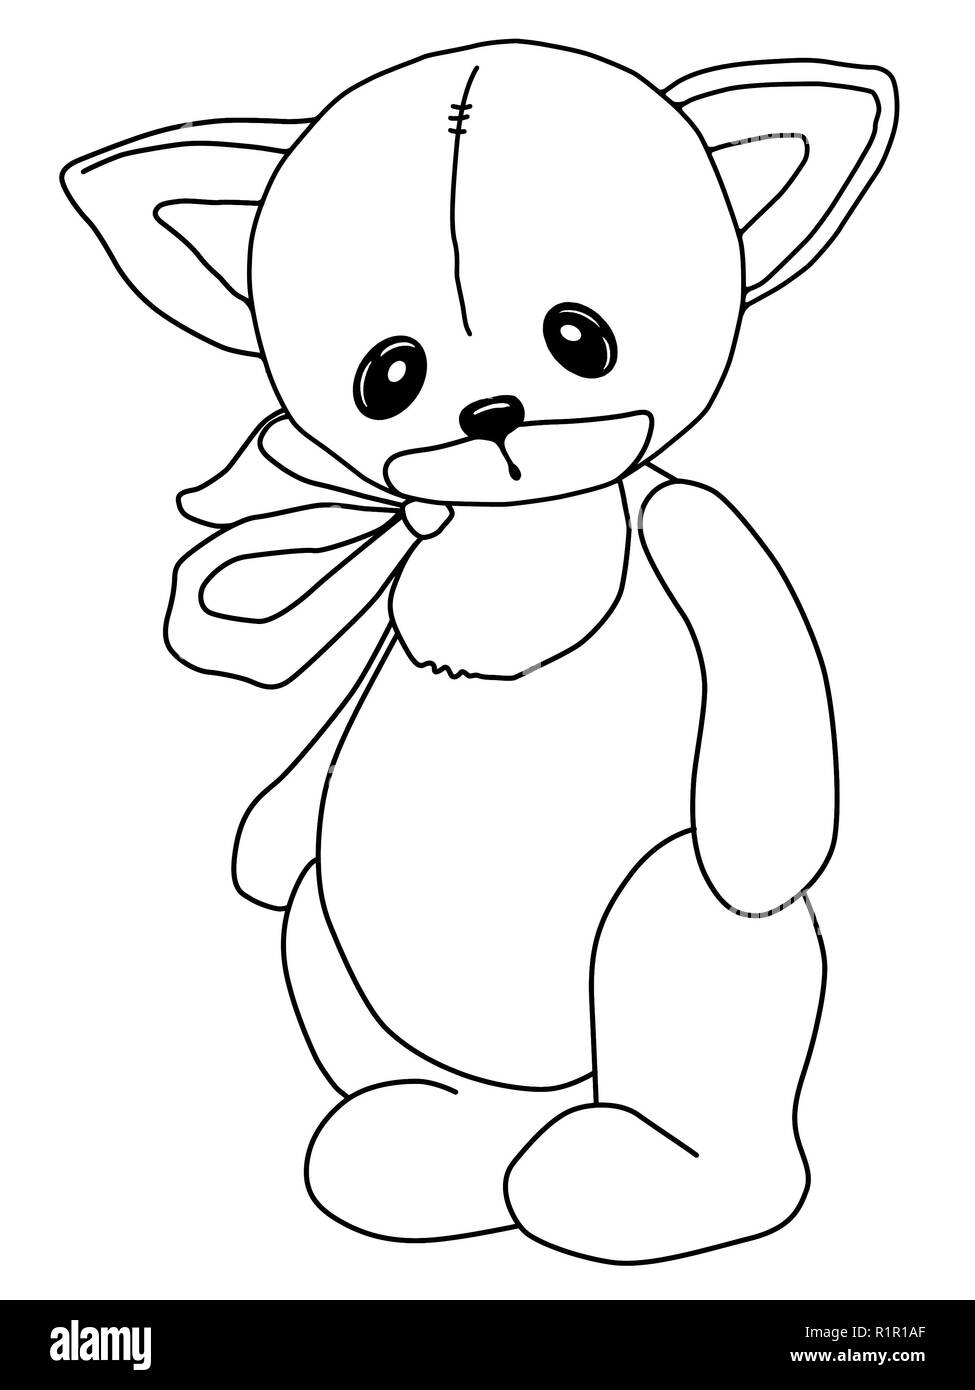 Black and white coloring. Teddy Cat. A toy. Drawn by hand. Black outline. Sad plush soft bear. Inc Stock Photo